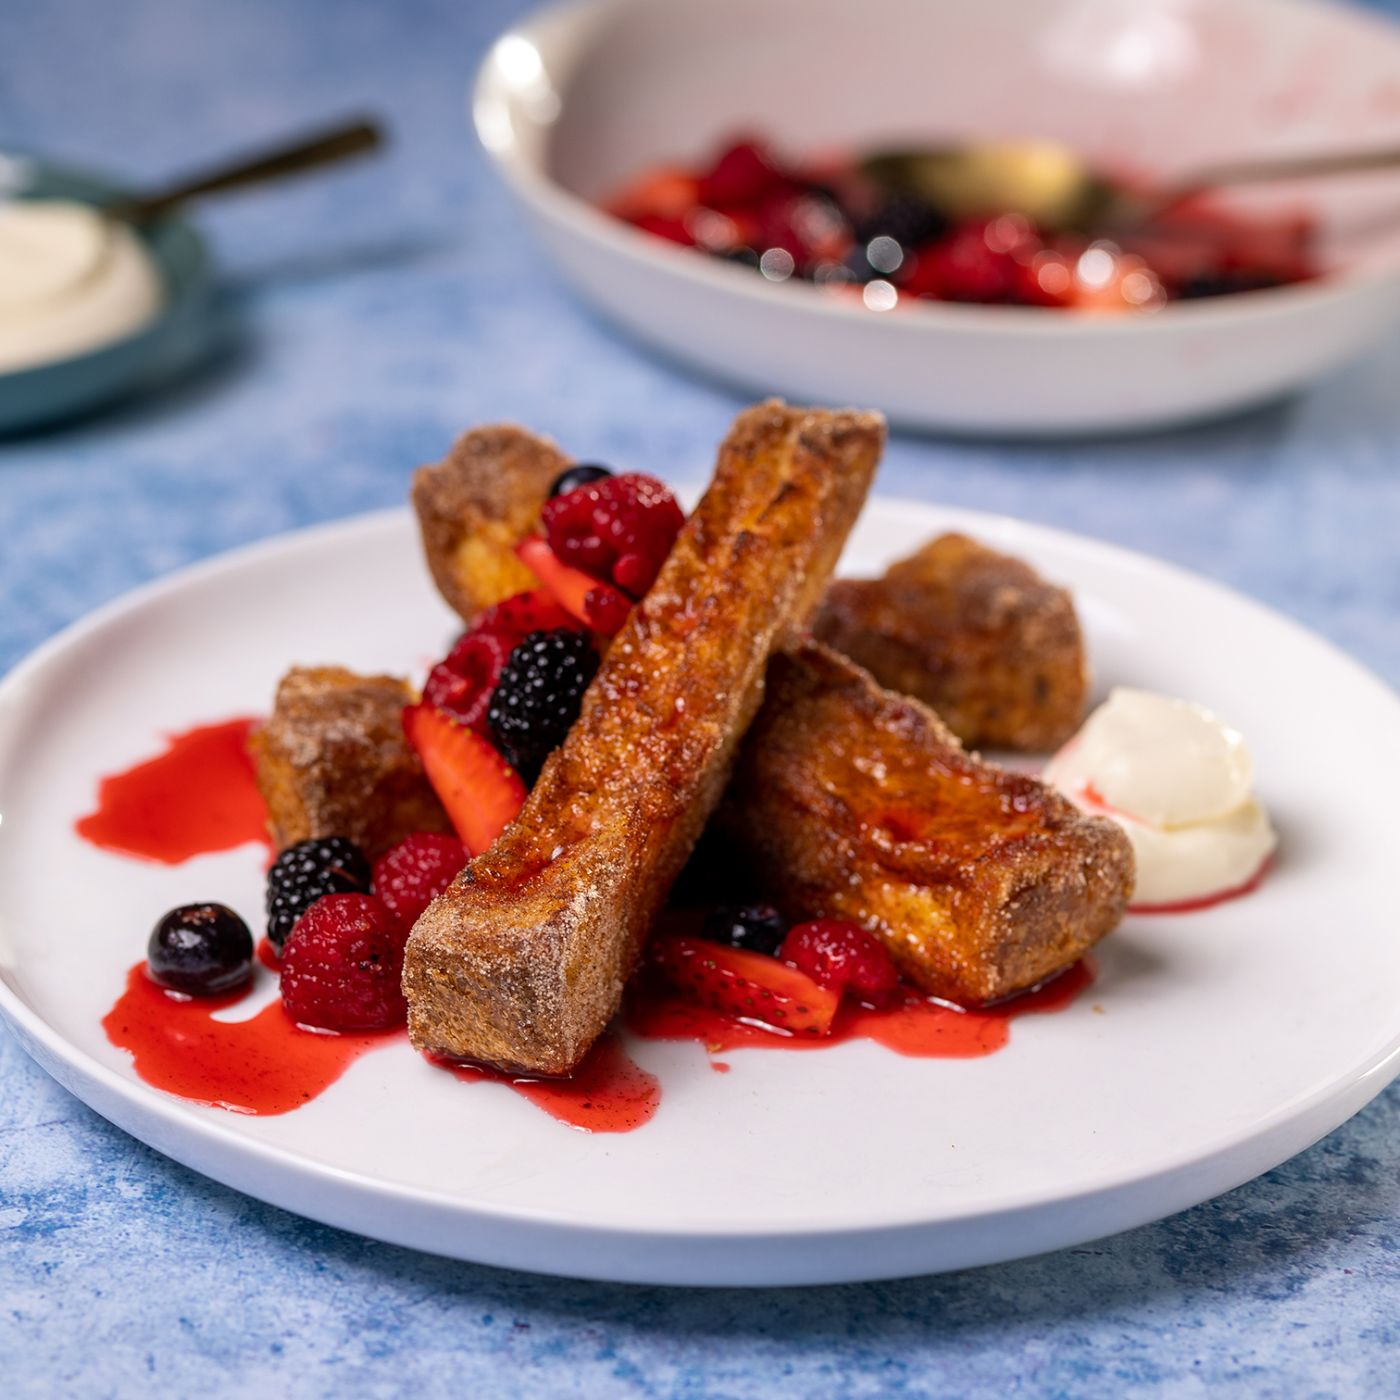 Website_Tile_-_French_Toast_Fingers_with_Mascarpone_Cream_and_Honeyed_Berries.jpg